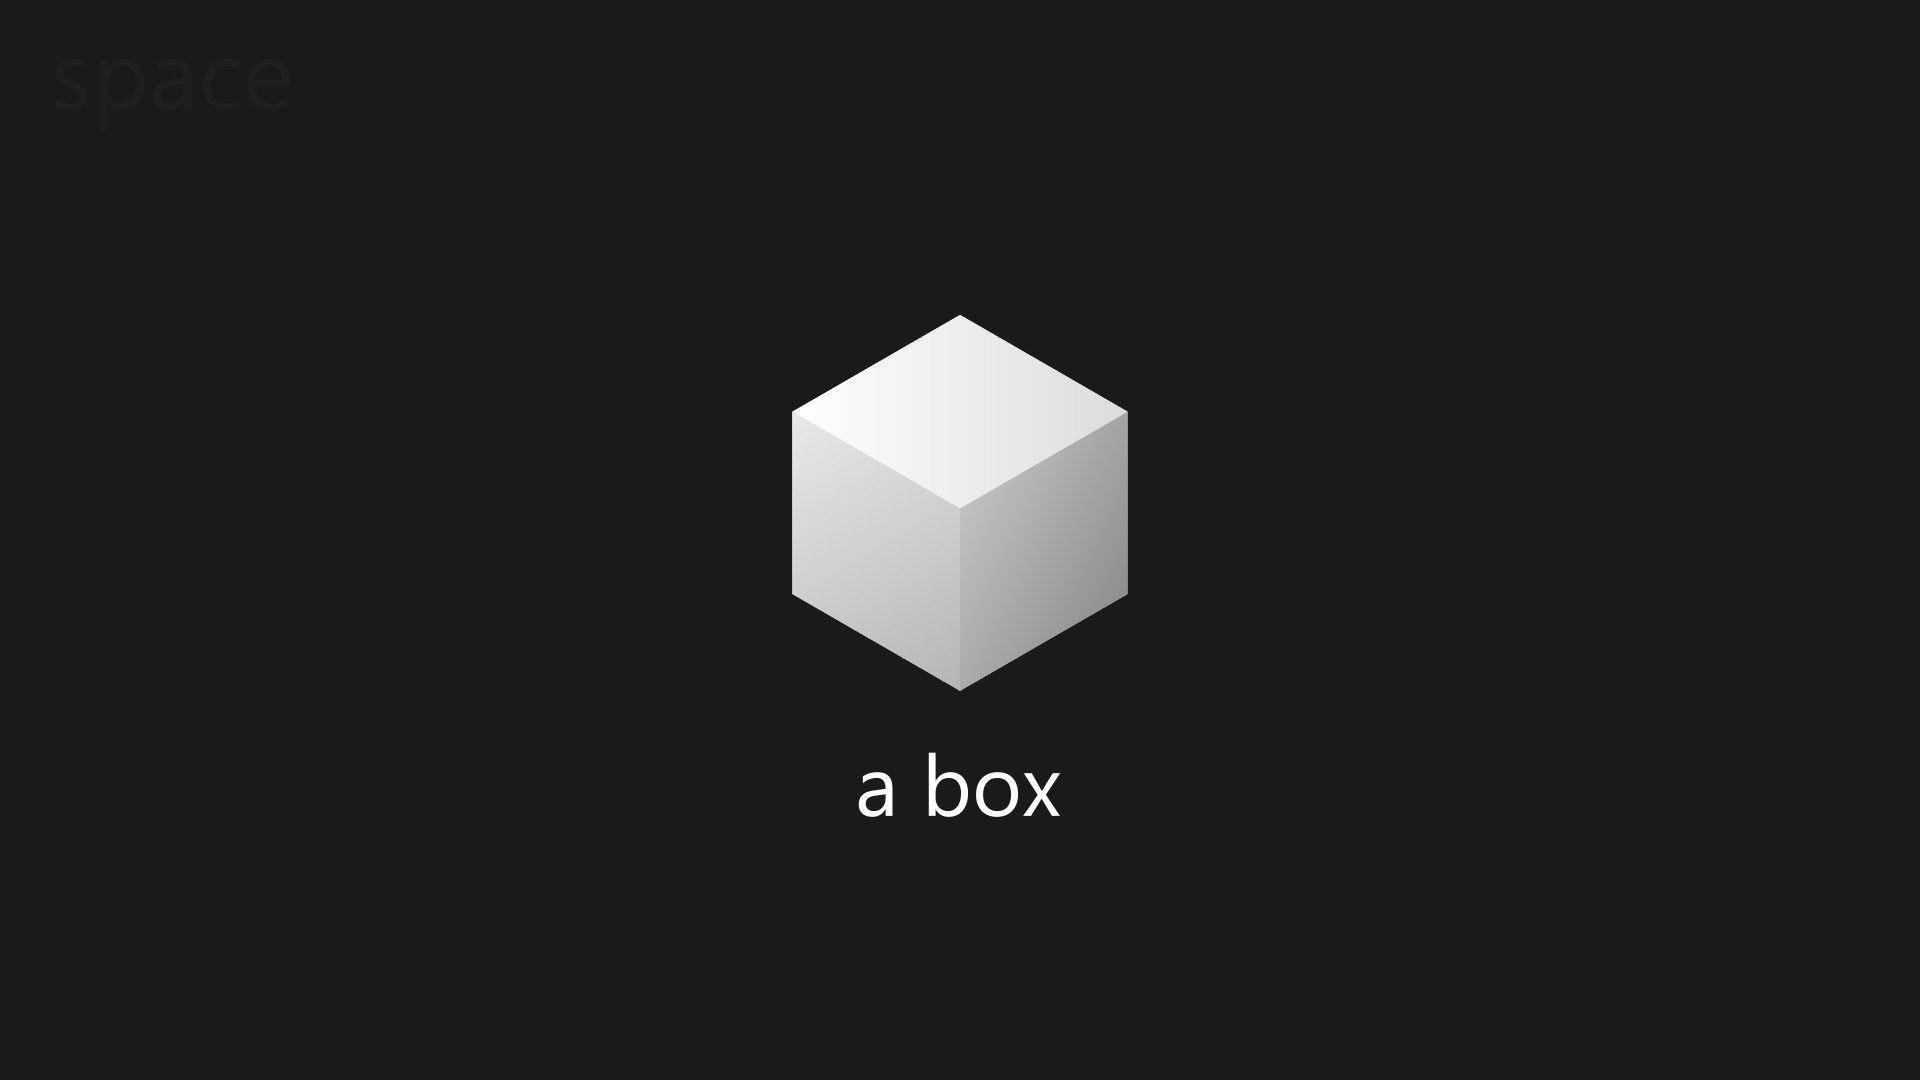 boxes, Simple, Space, Text, Vector graphics Wallpaper